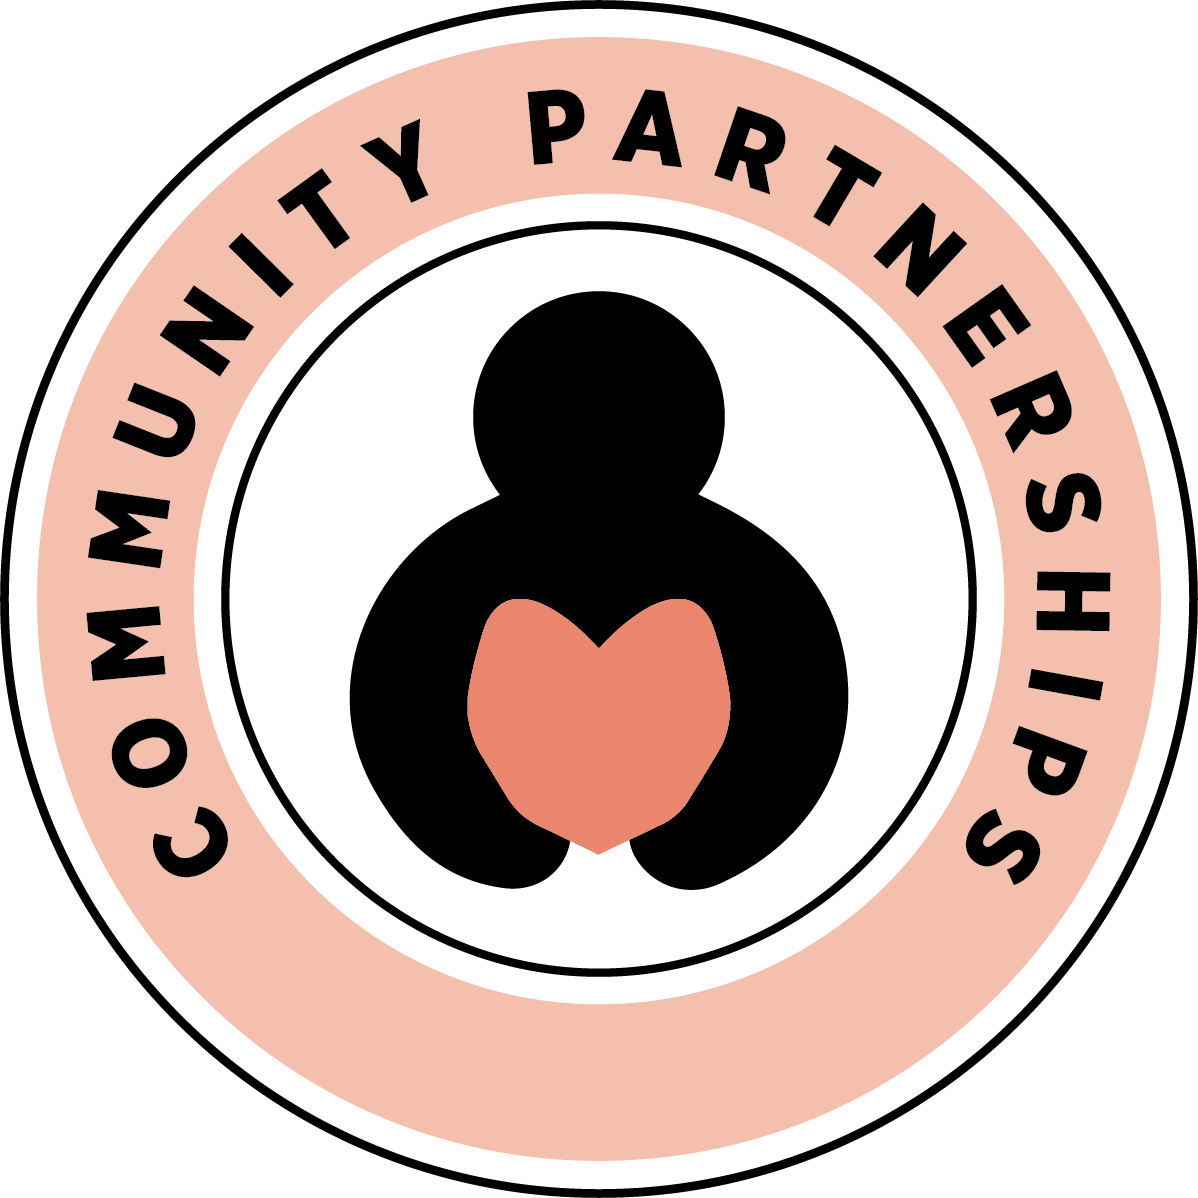 casa franchise sticker that reads "community partners" one of our drives for building genuine relationships